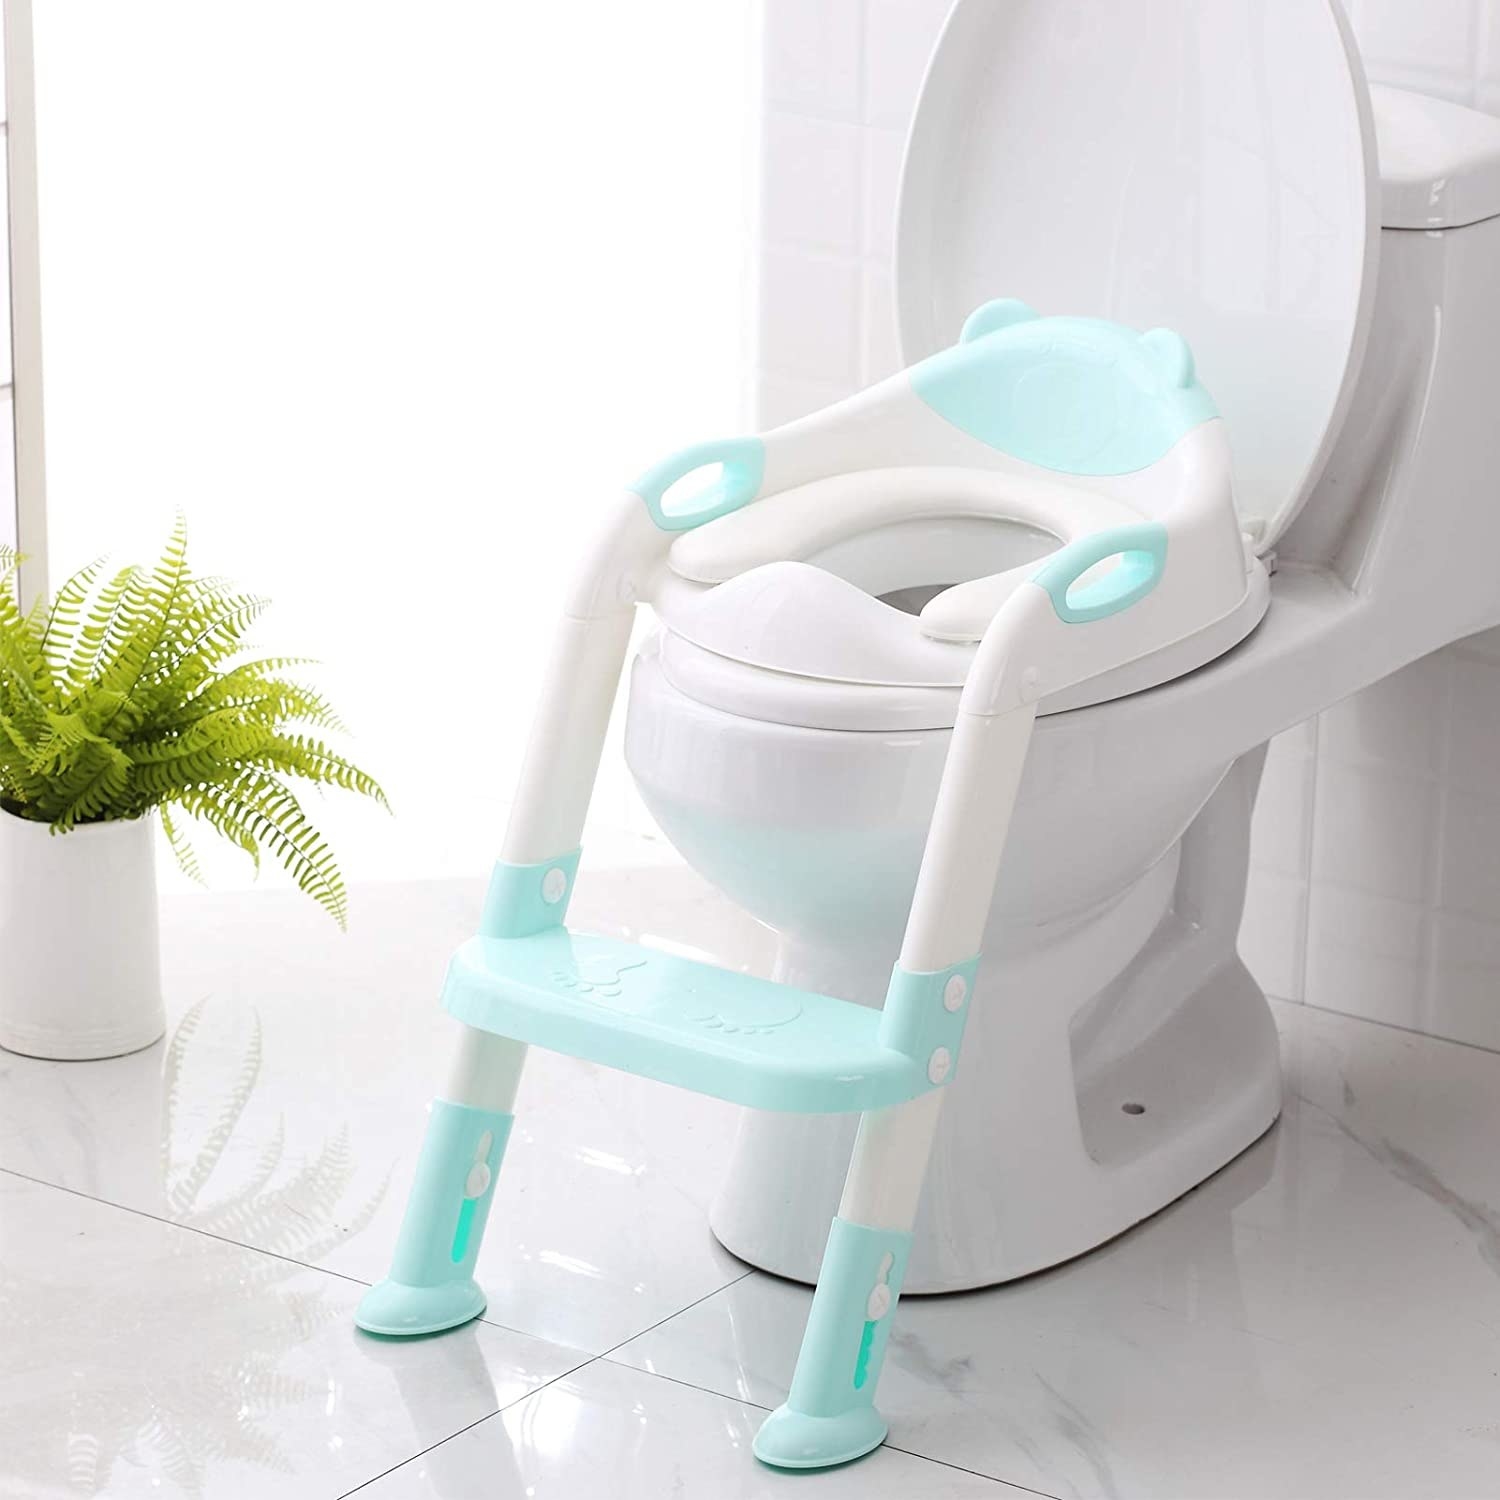 small child&#x27;s seat with handles on top of a regular toilet seat. it is attached to a stool to help small kids climb up.